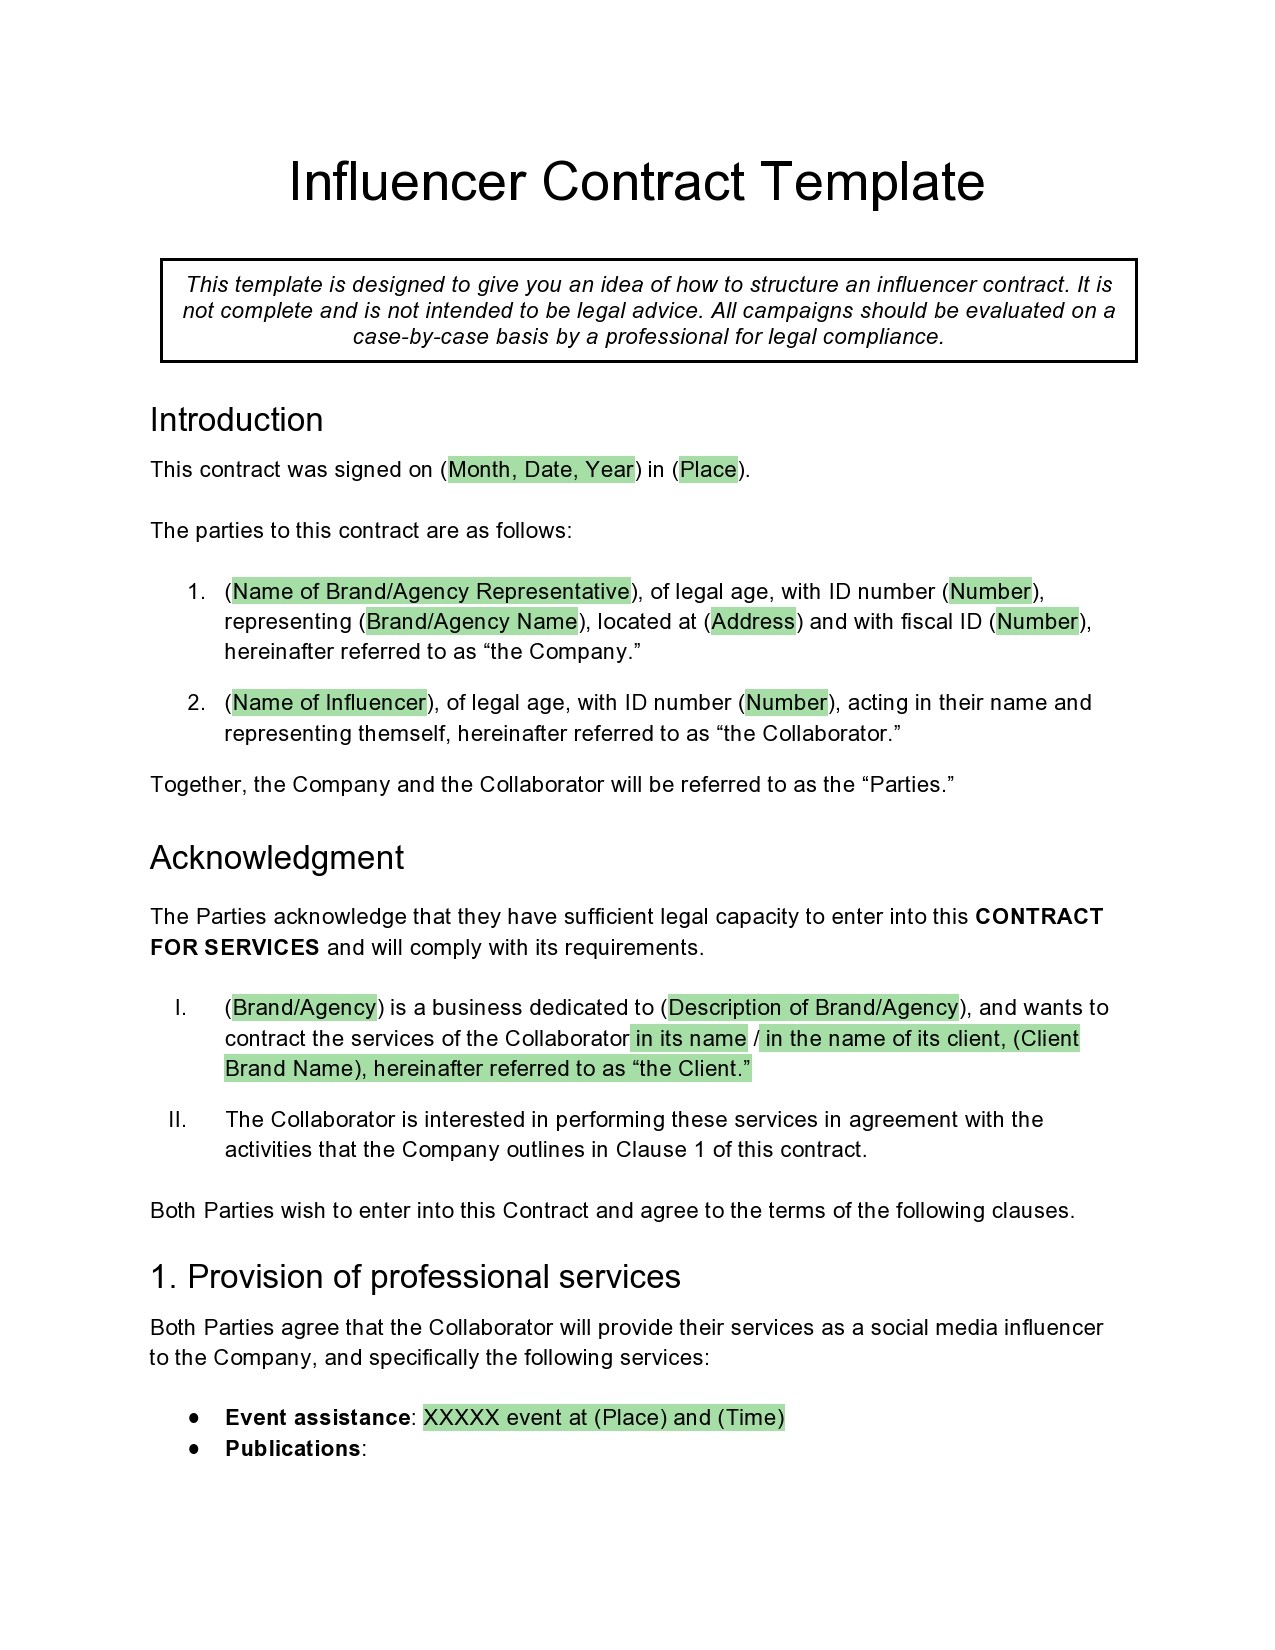 Free influencer contract template 13